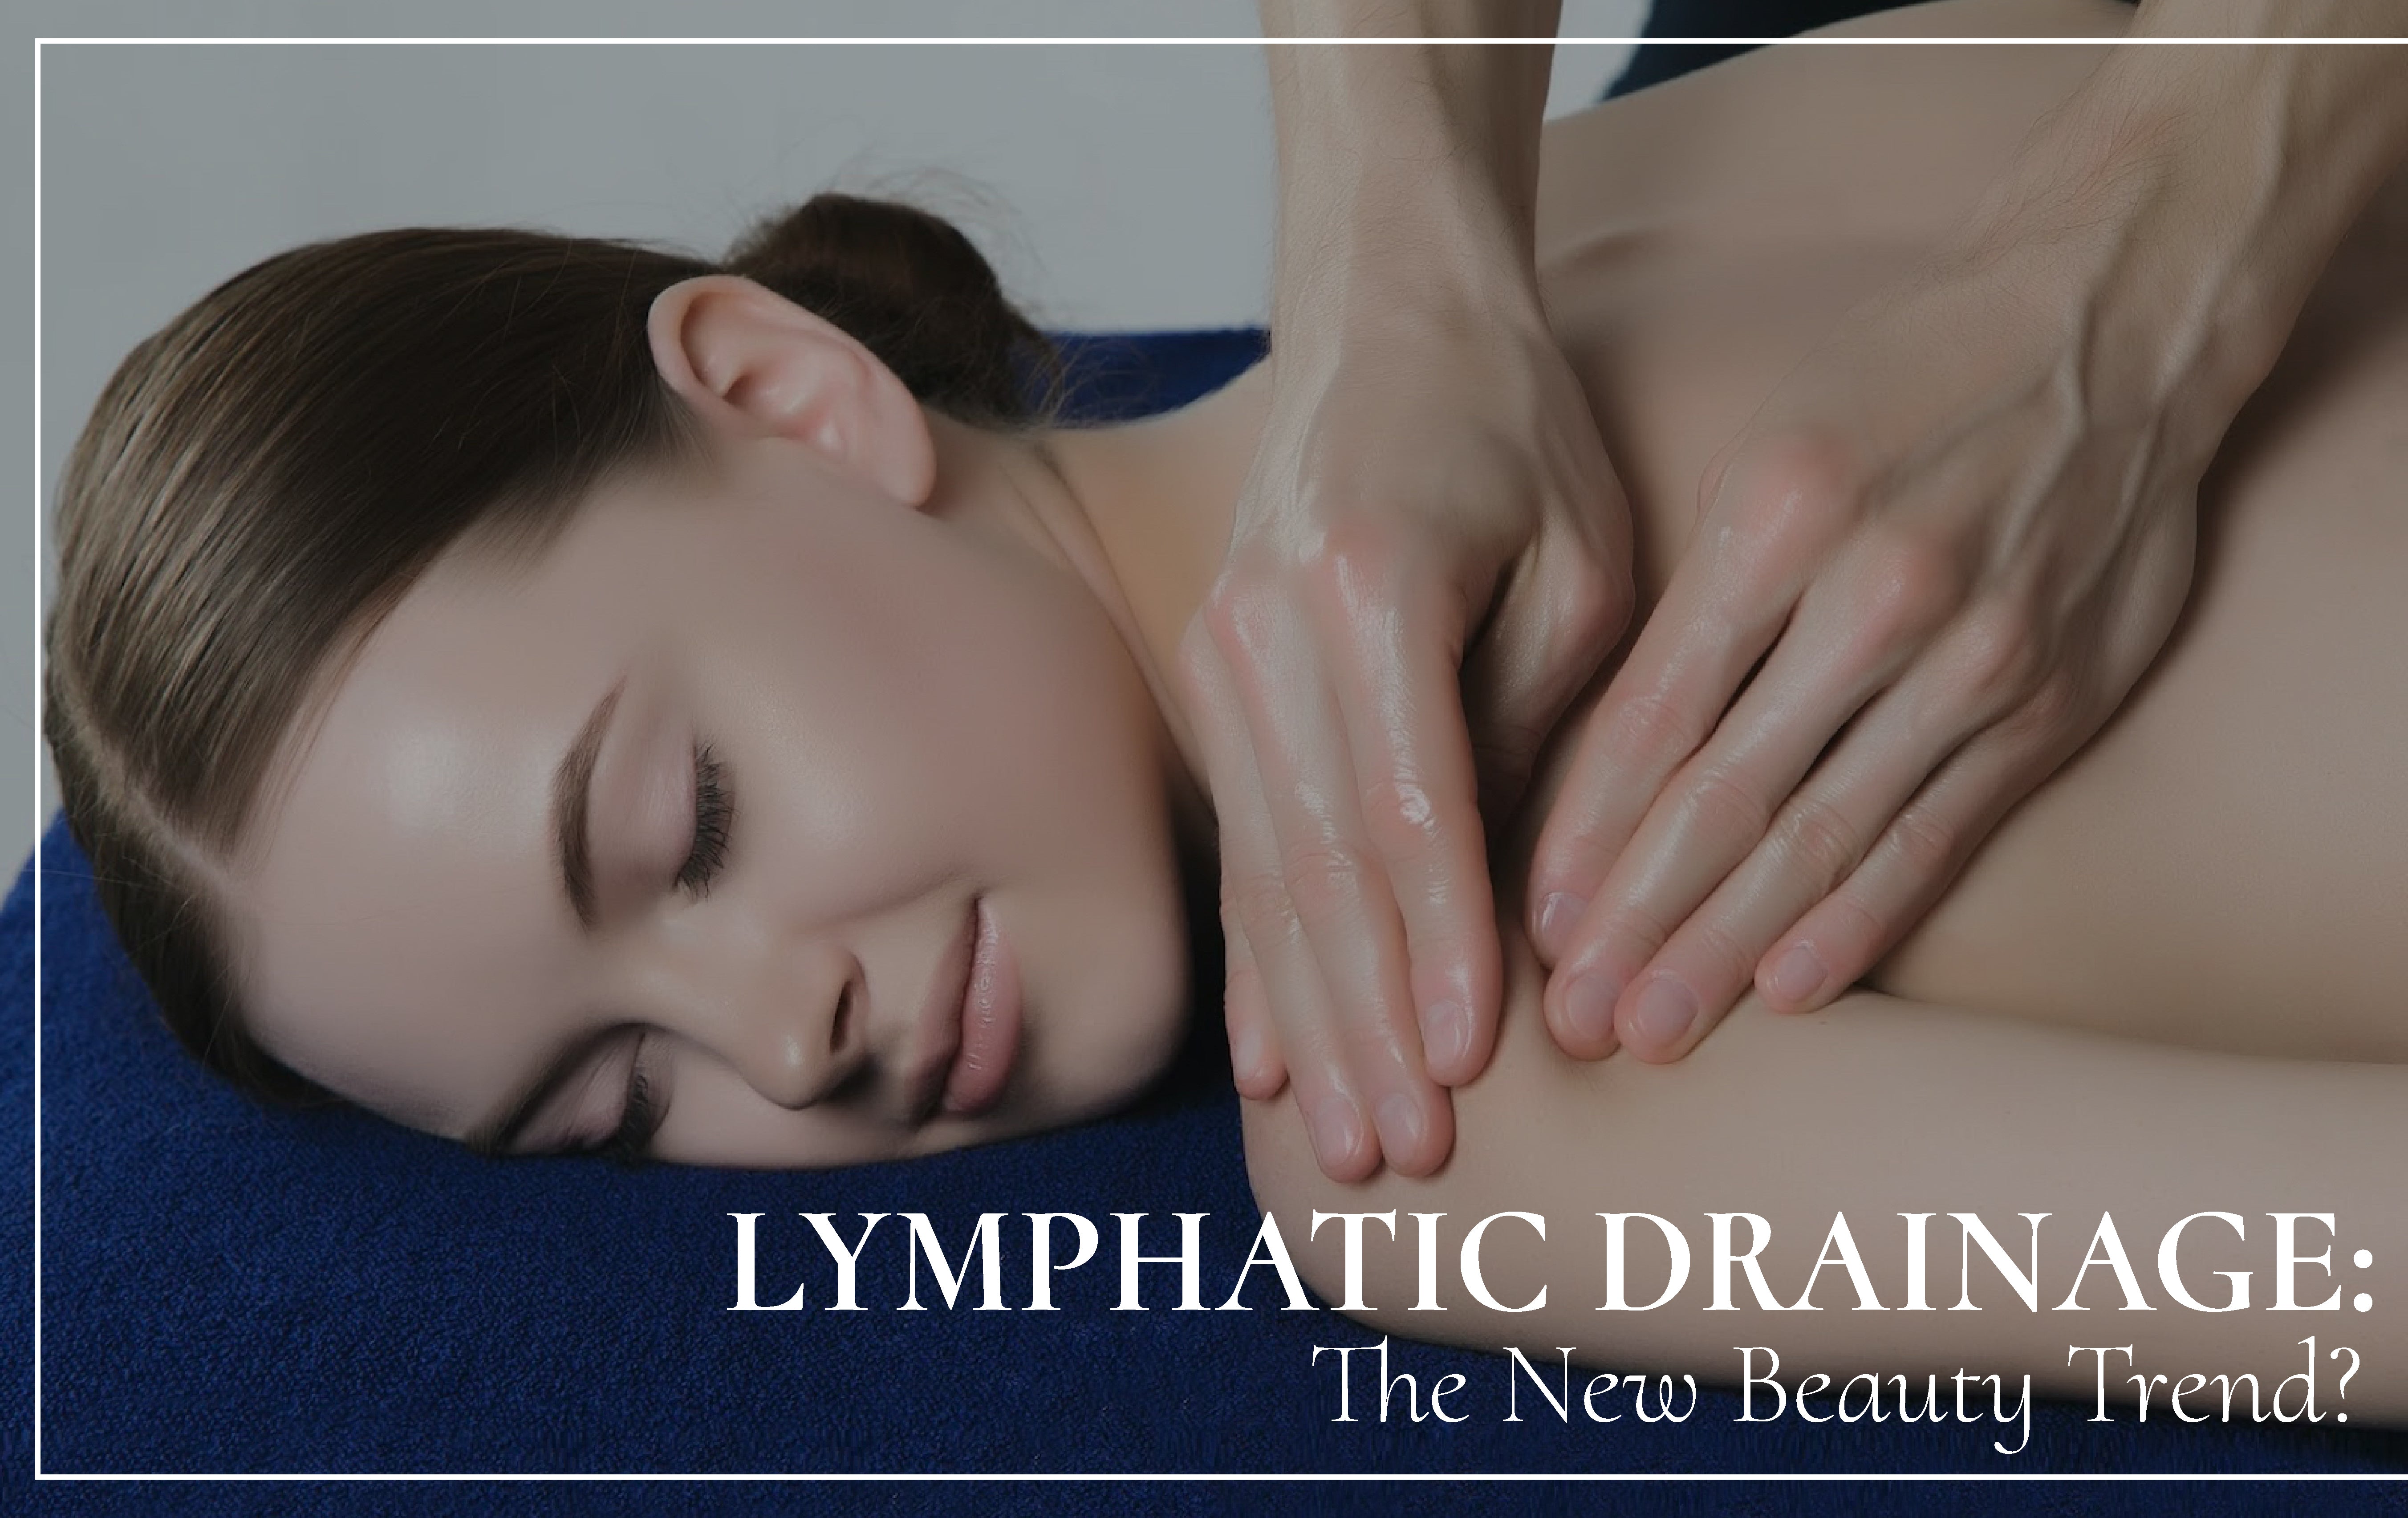 Lymphatic Drainage: The New Beauty Trend? Everything You Need To Know About This Fad